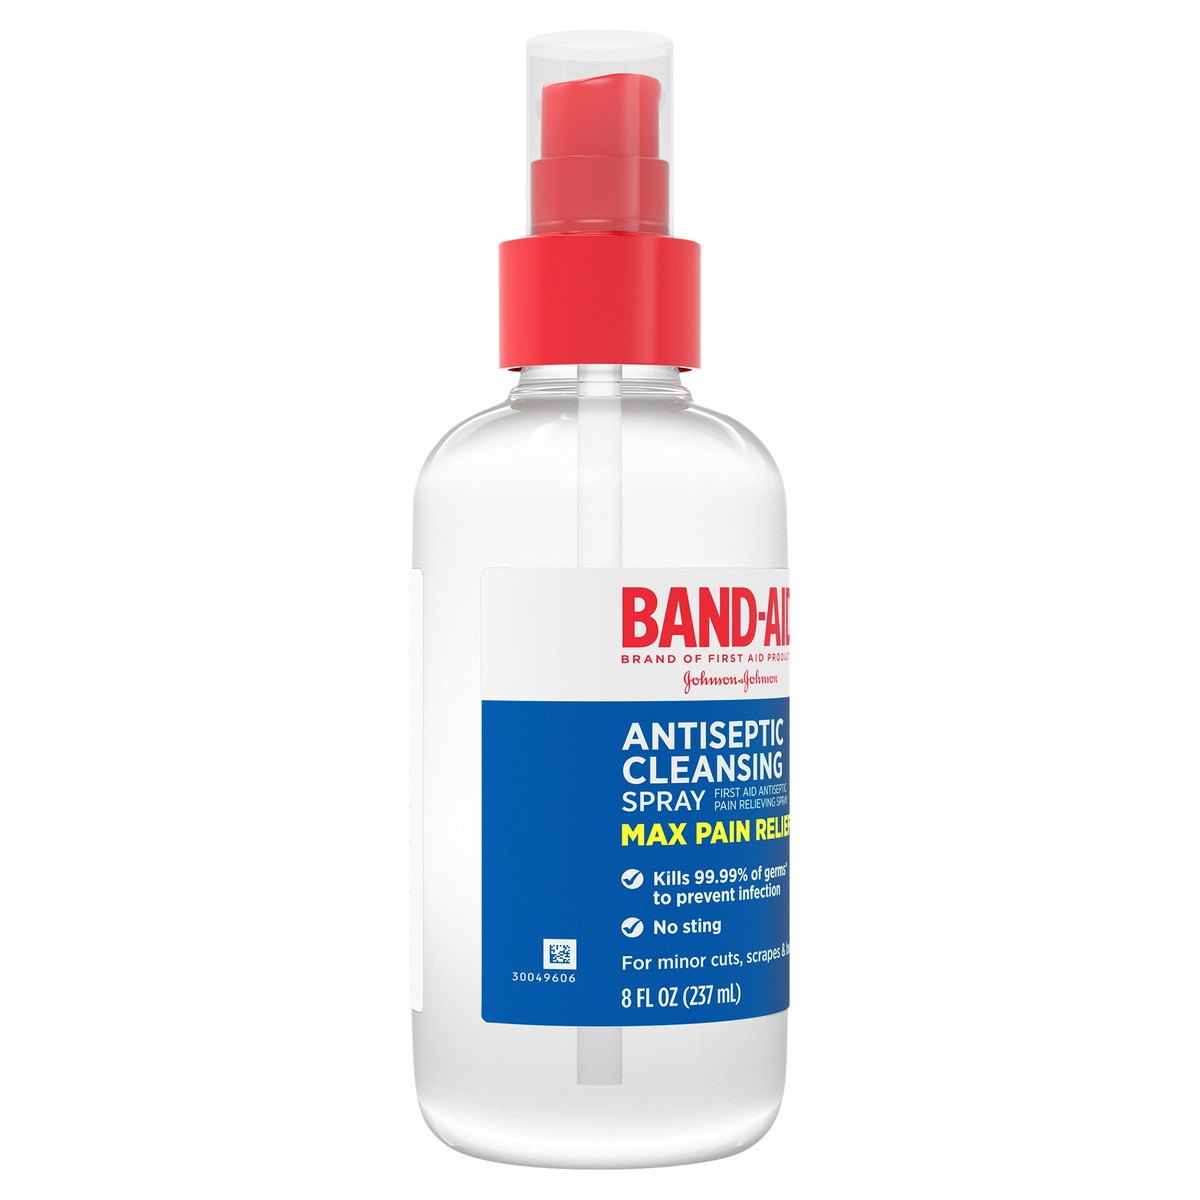 slide 6 of 7, BAND-AID Antiseptic Cleansing Spray, First Aid Antiseptic Spray Relieves Pain & Kill Germs, with Benzalkonium Cl Wound Antiseptic & Pramoxine HCl Topical Analgesic, 8 fl. oz, 8 fl oz